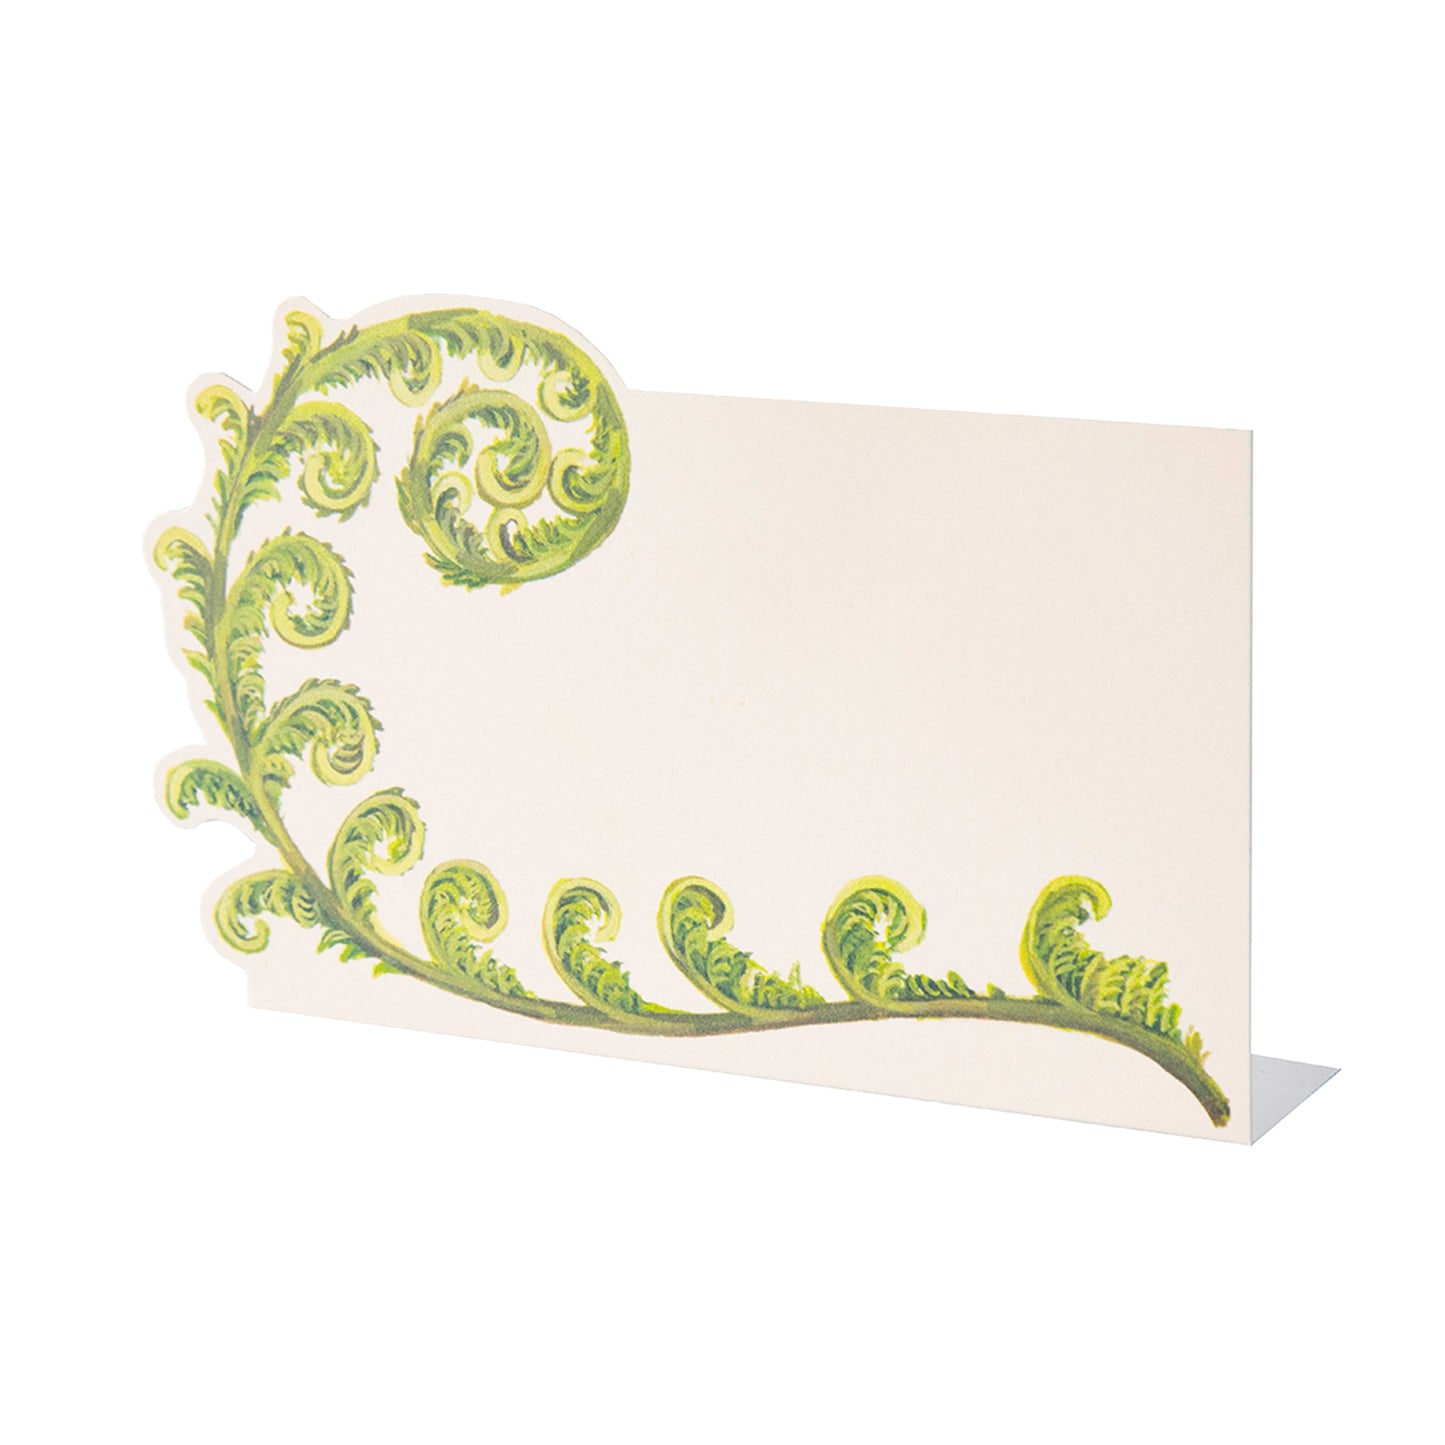 Fiddlehead Fern Place Card features a delicate spiraling fiddlehead that perfectly frames your writing space.